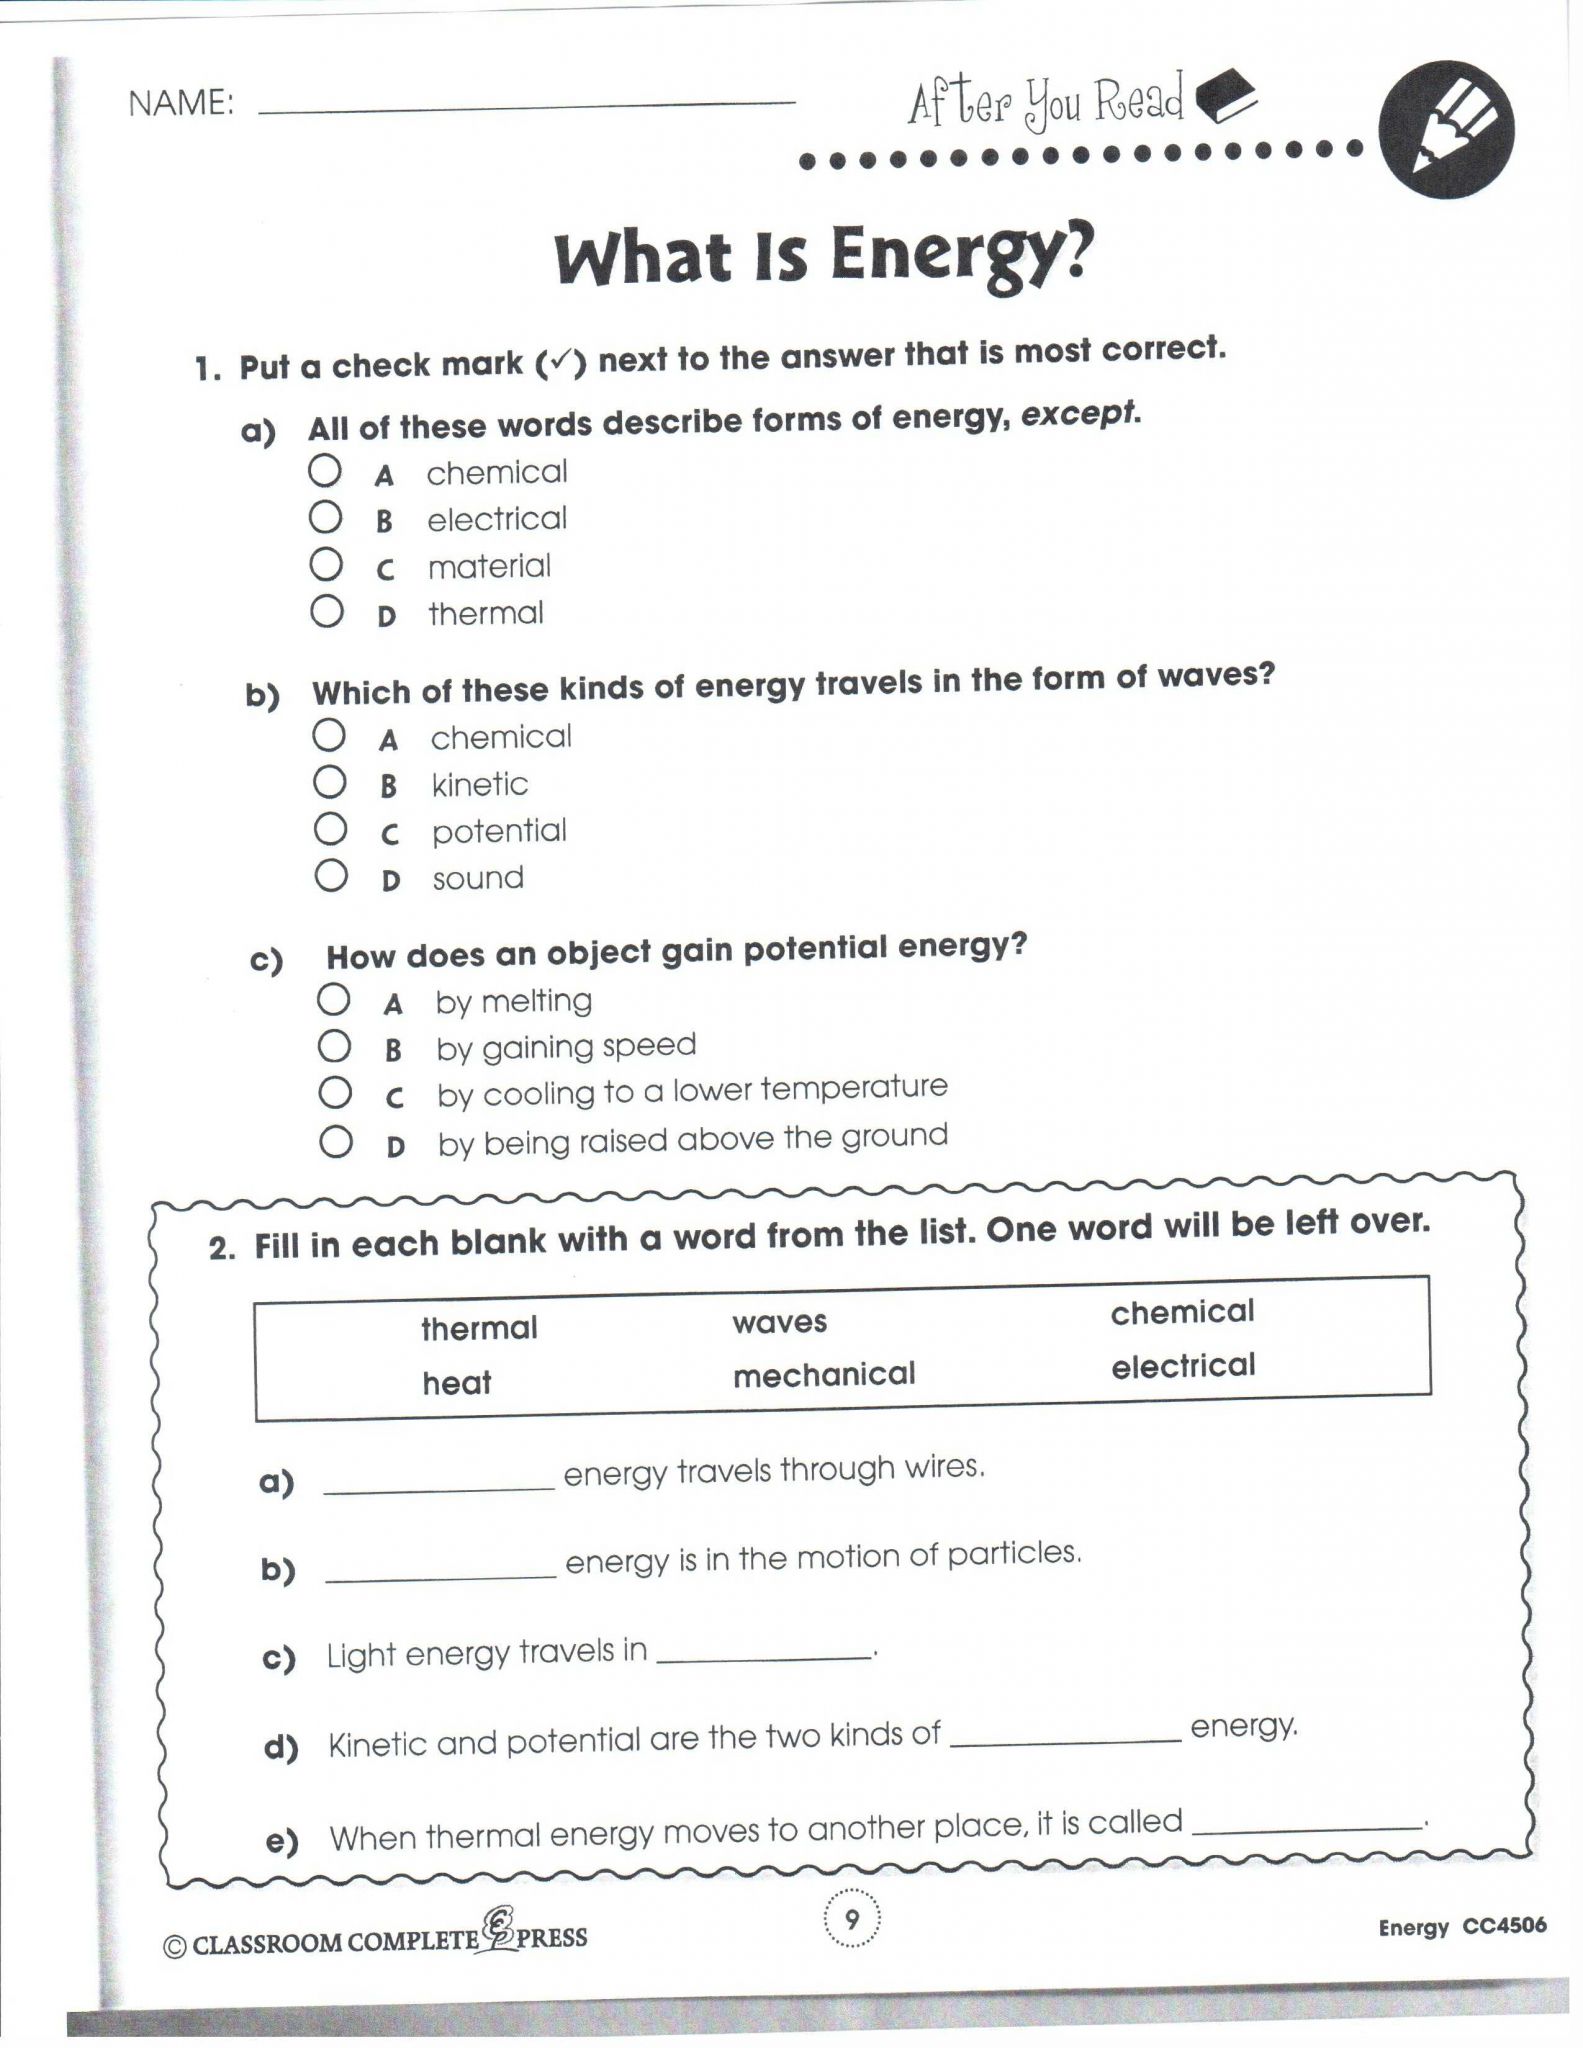 Hyperbole Worksheet 1 Answers with Heat Energy 3rd Grade Worksheets the Best Worksheets Image